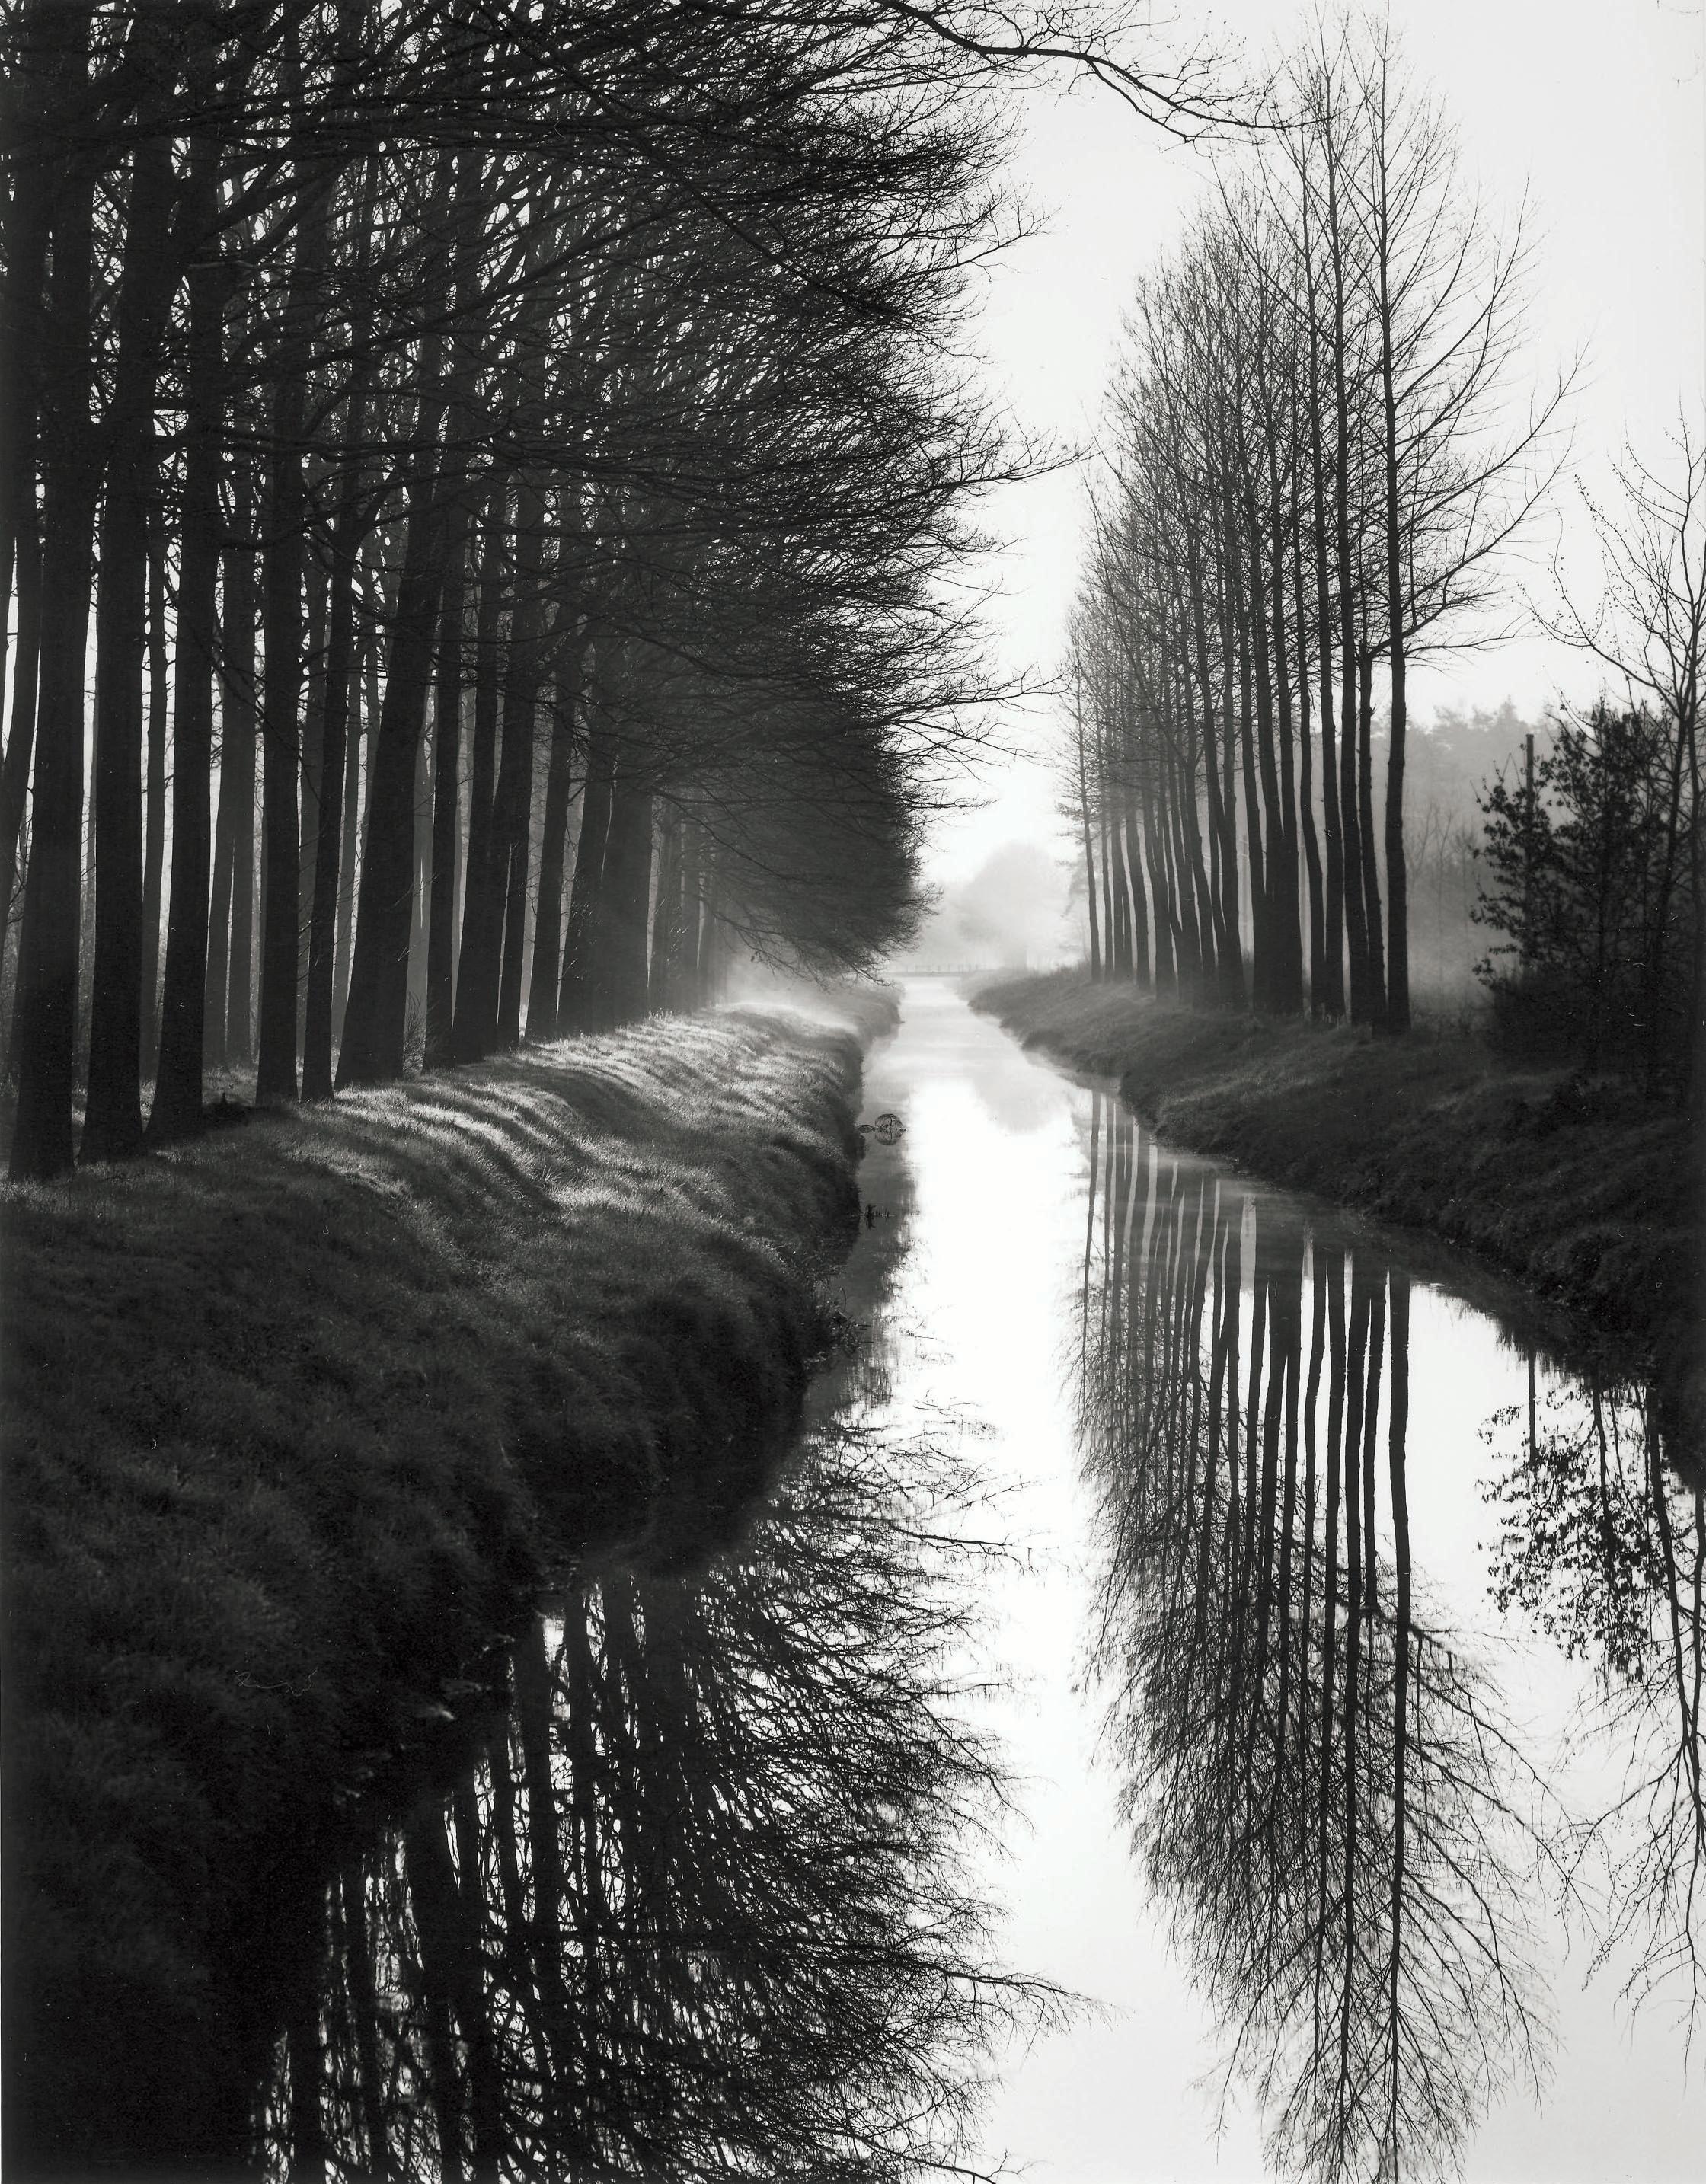 What was Brett Weston known for?